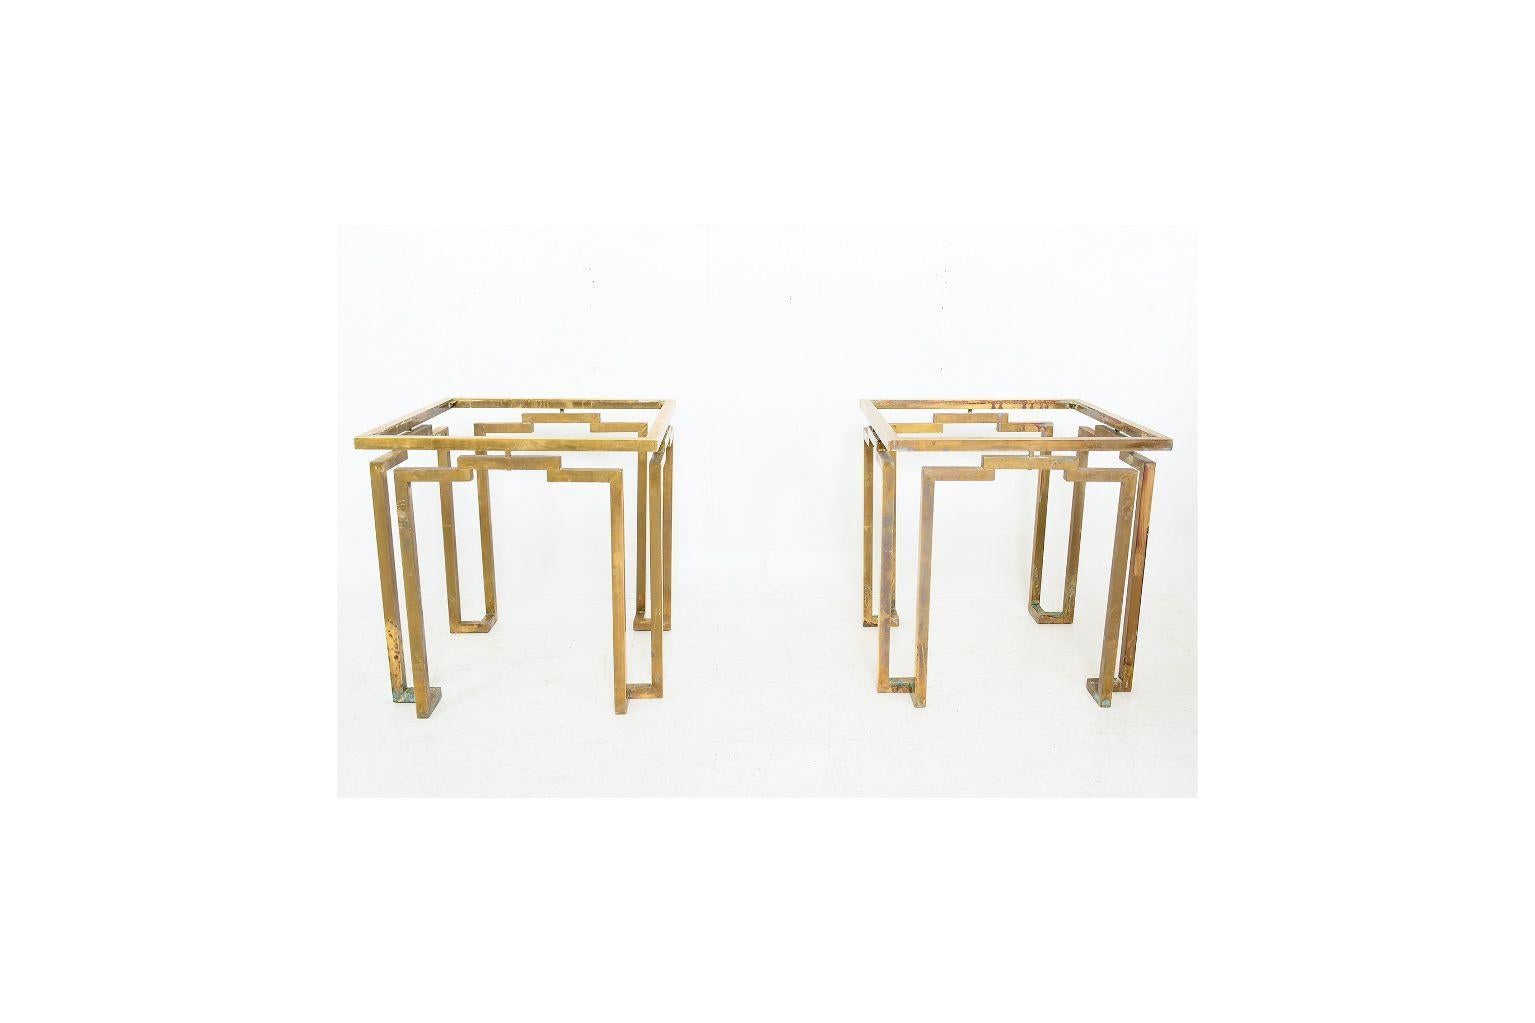 For your consideration: Modernist geometric bold design brass and glass side tables by Arturo Pani. Beautiful sculptural shape. Mexico 1950s (Please note we are offering in another listing a matching coffee table to complete this fabulous set.